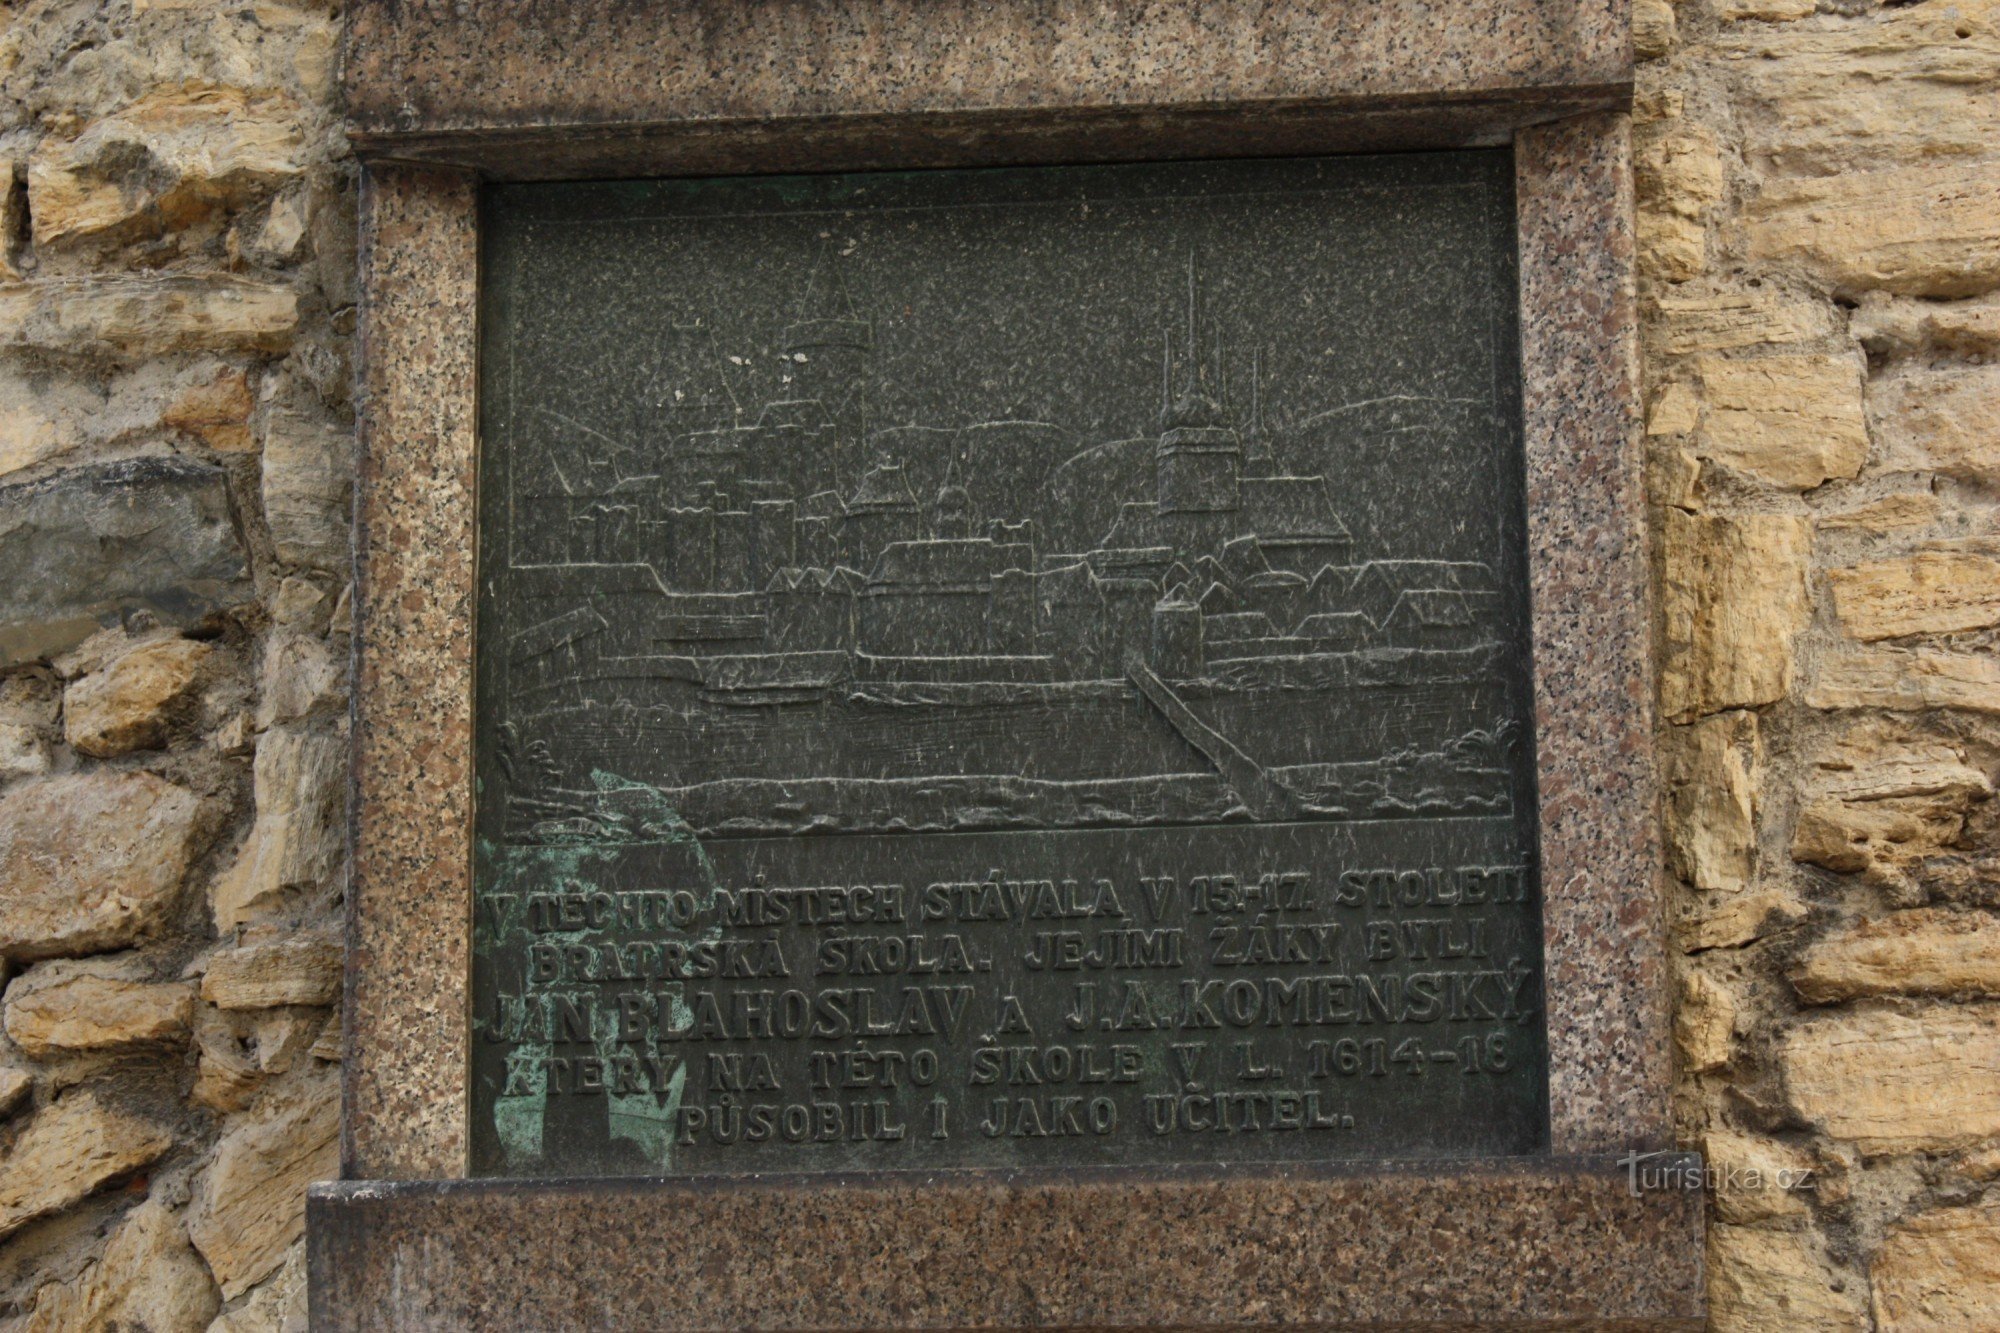 Commemorative plaque of the fraternity school